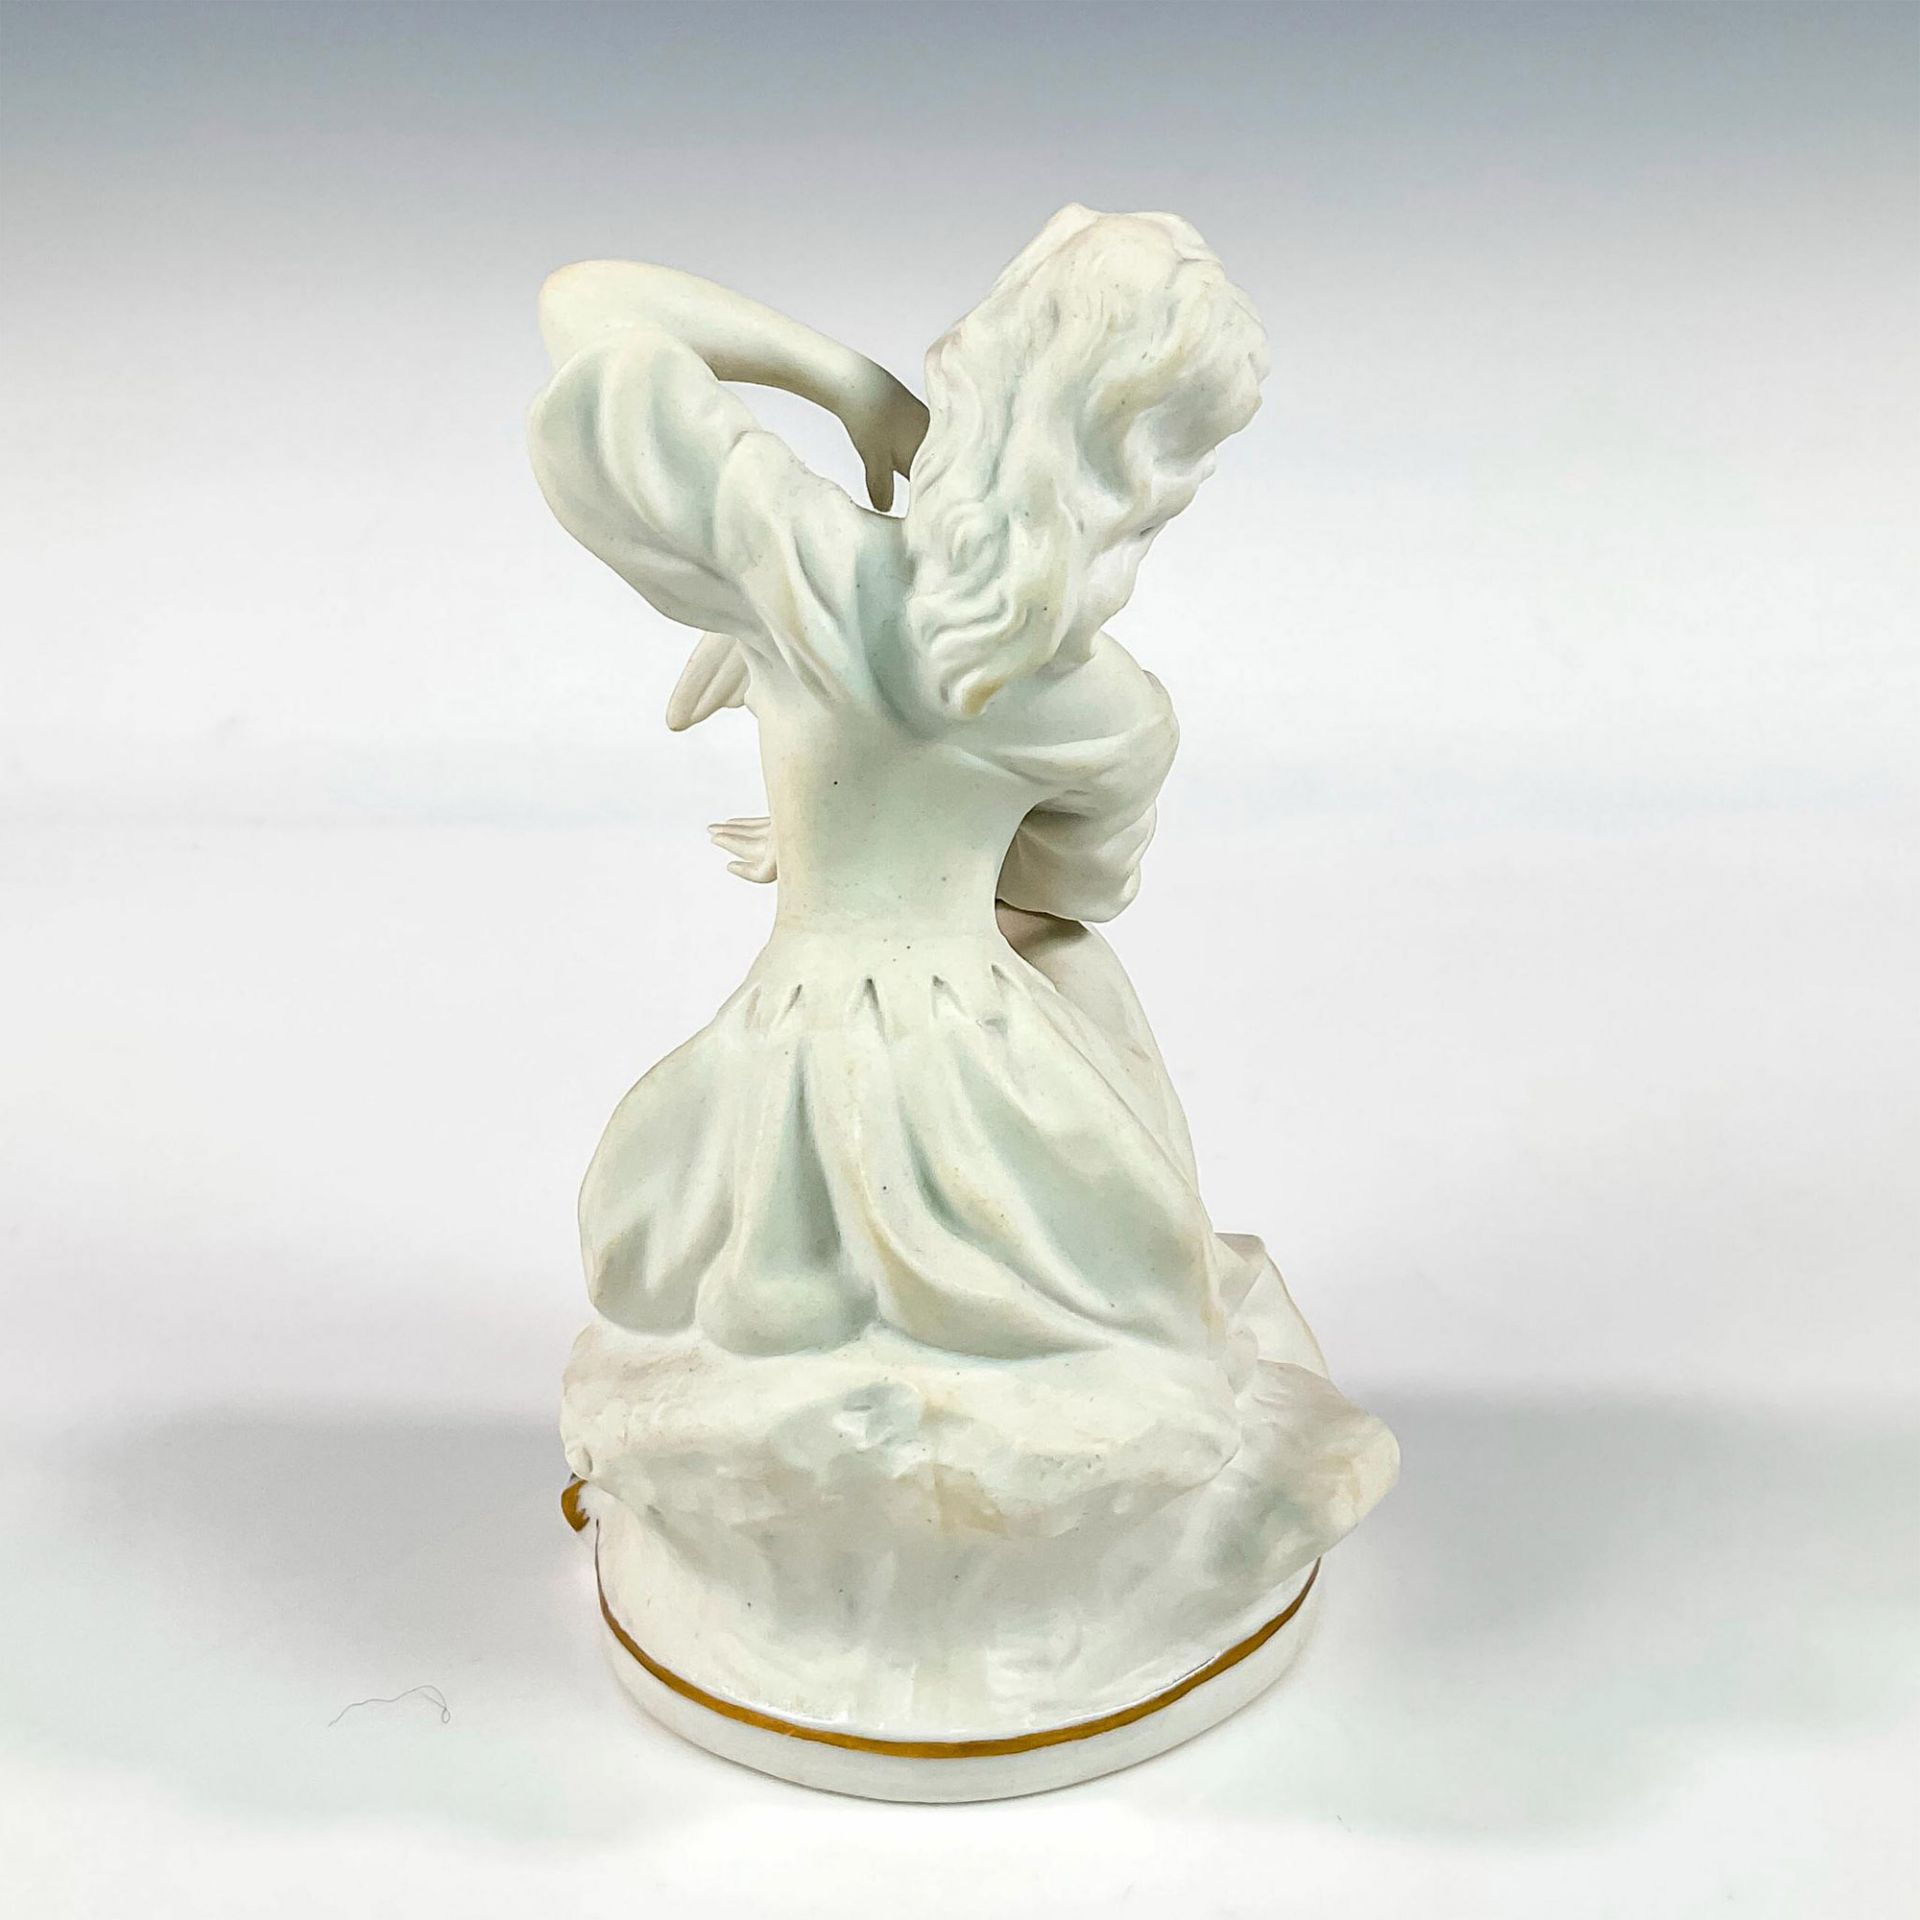 Bisque Porcelain Figurine Girl with Dove - Image 2 of 3